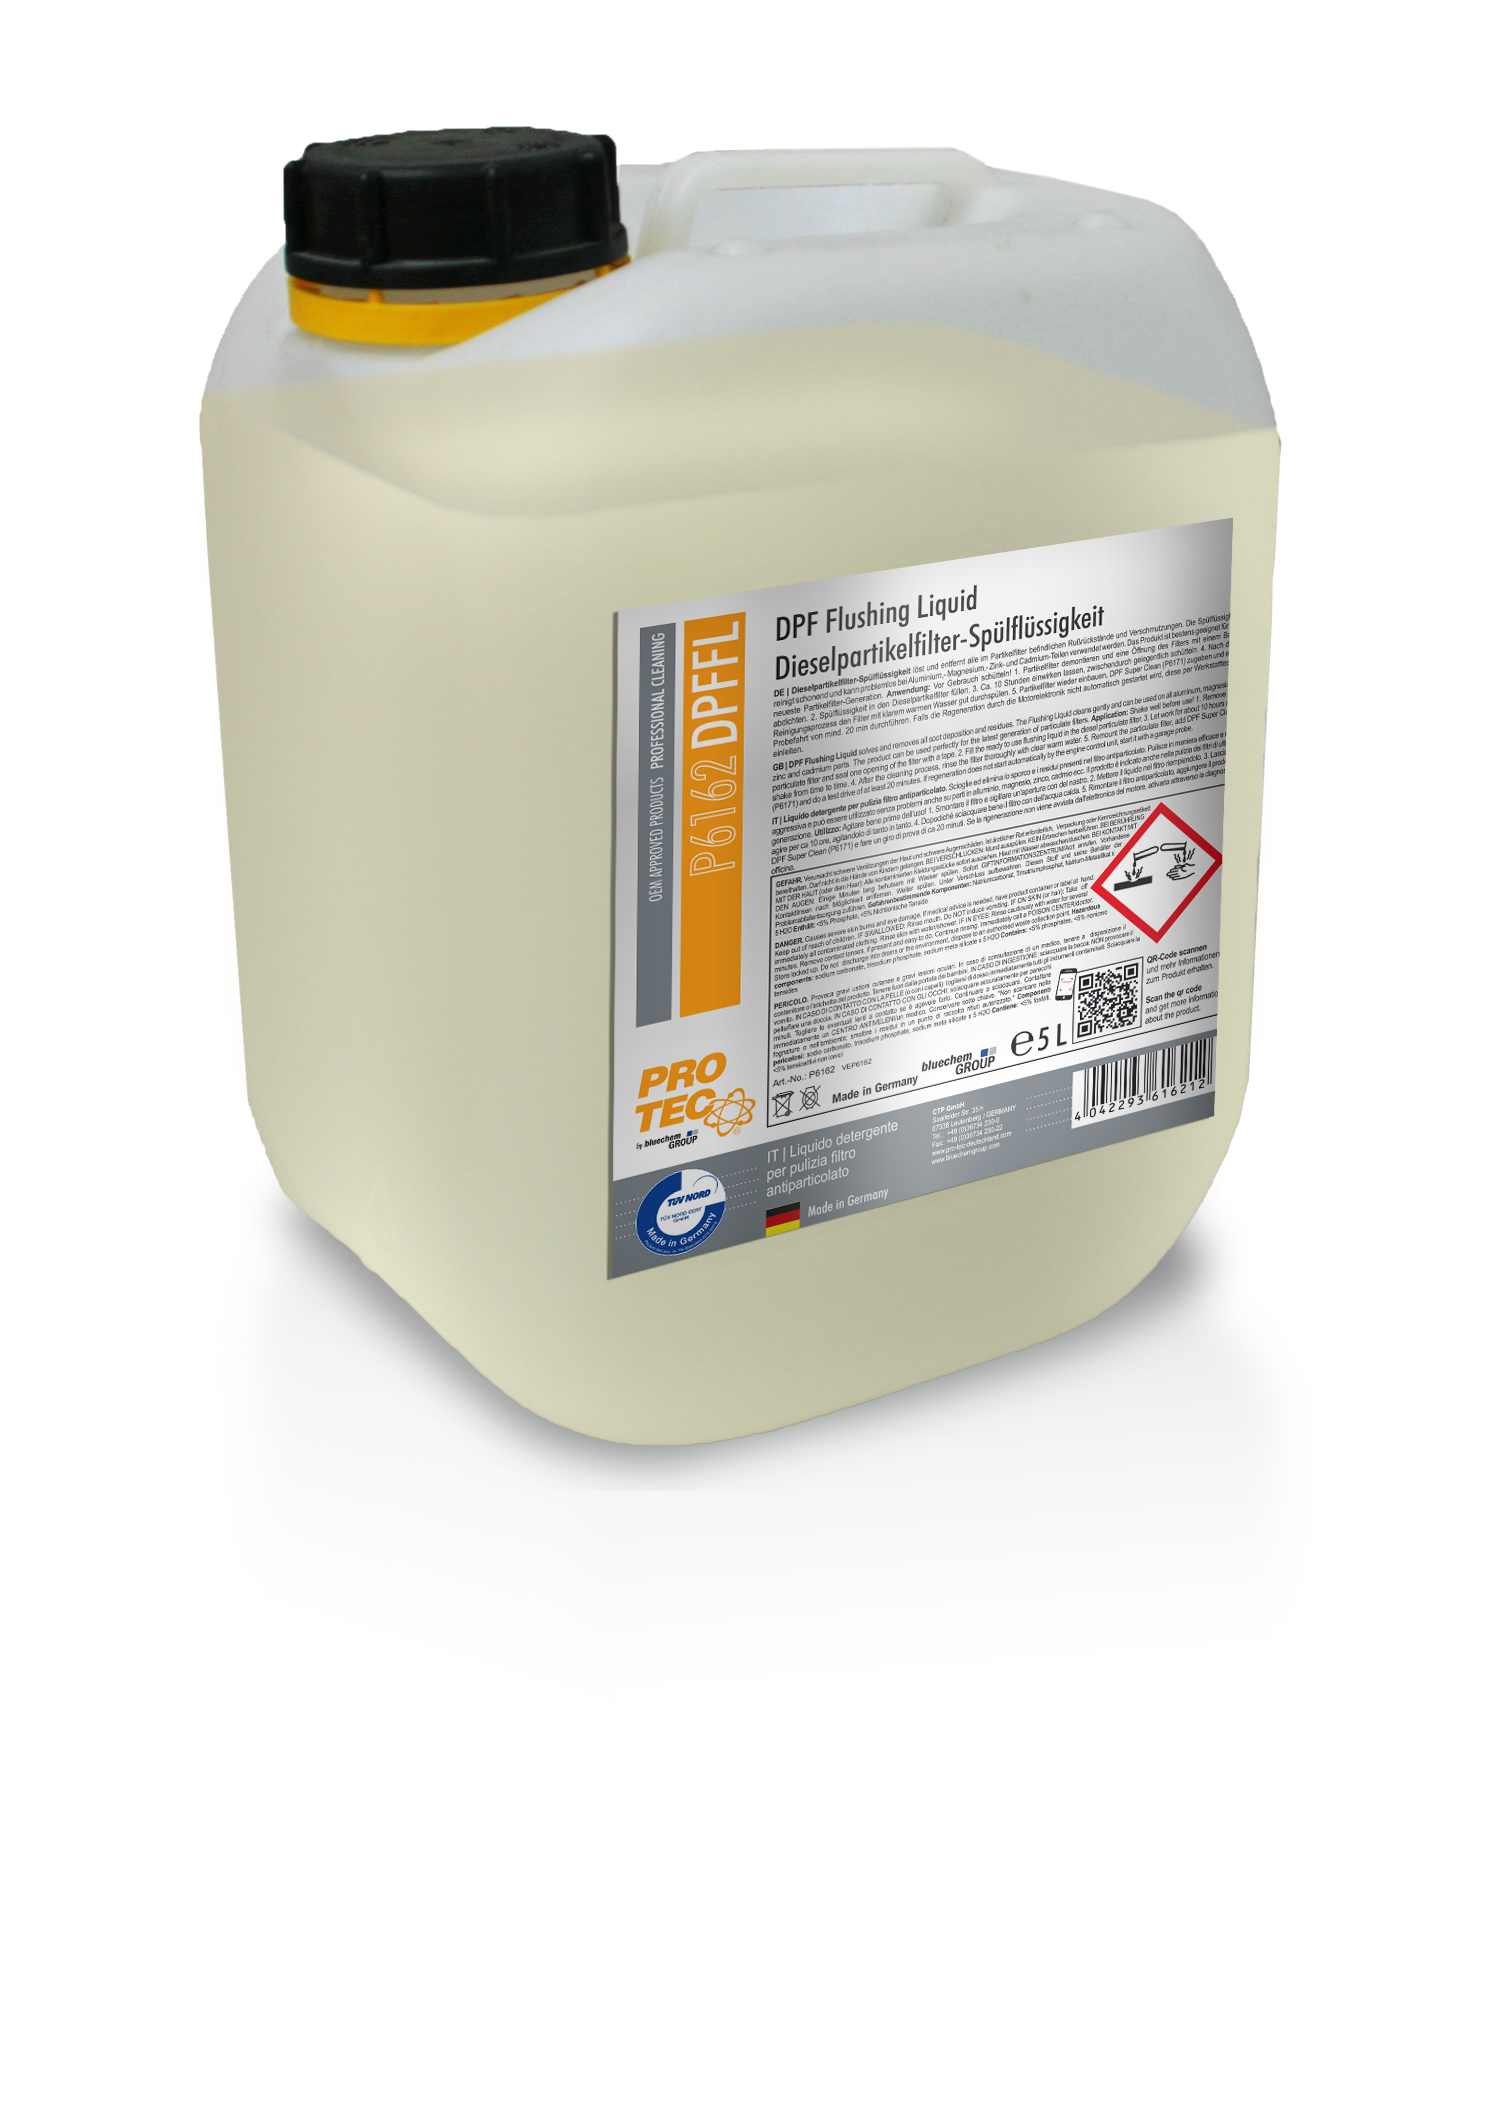 DPF/Catalyst Cleaner - bluechemGROUP